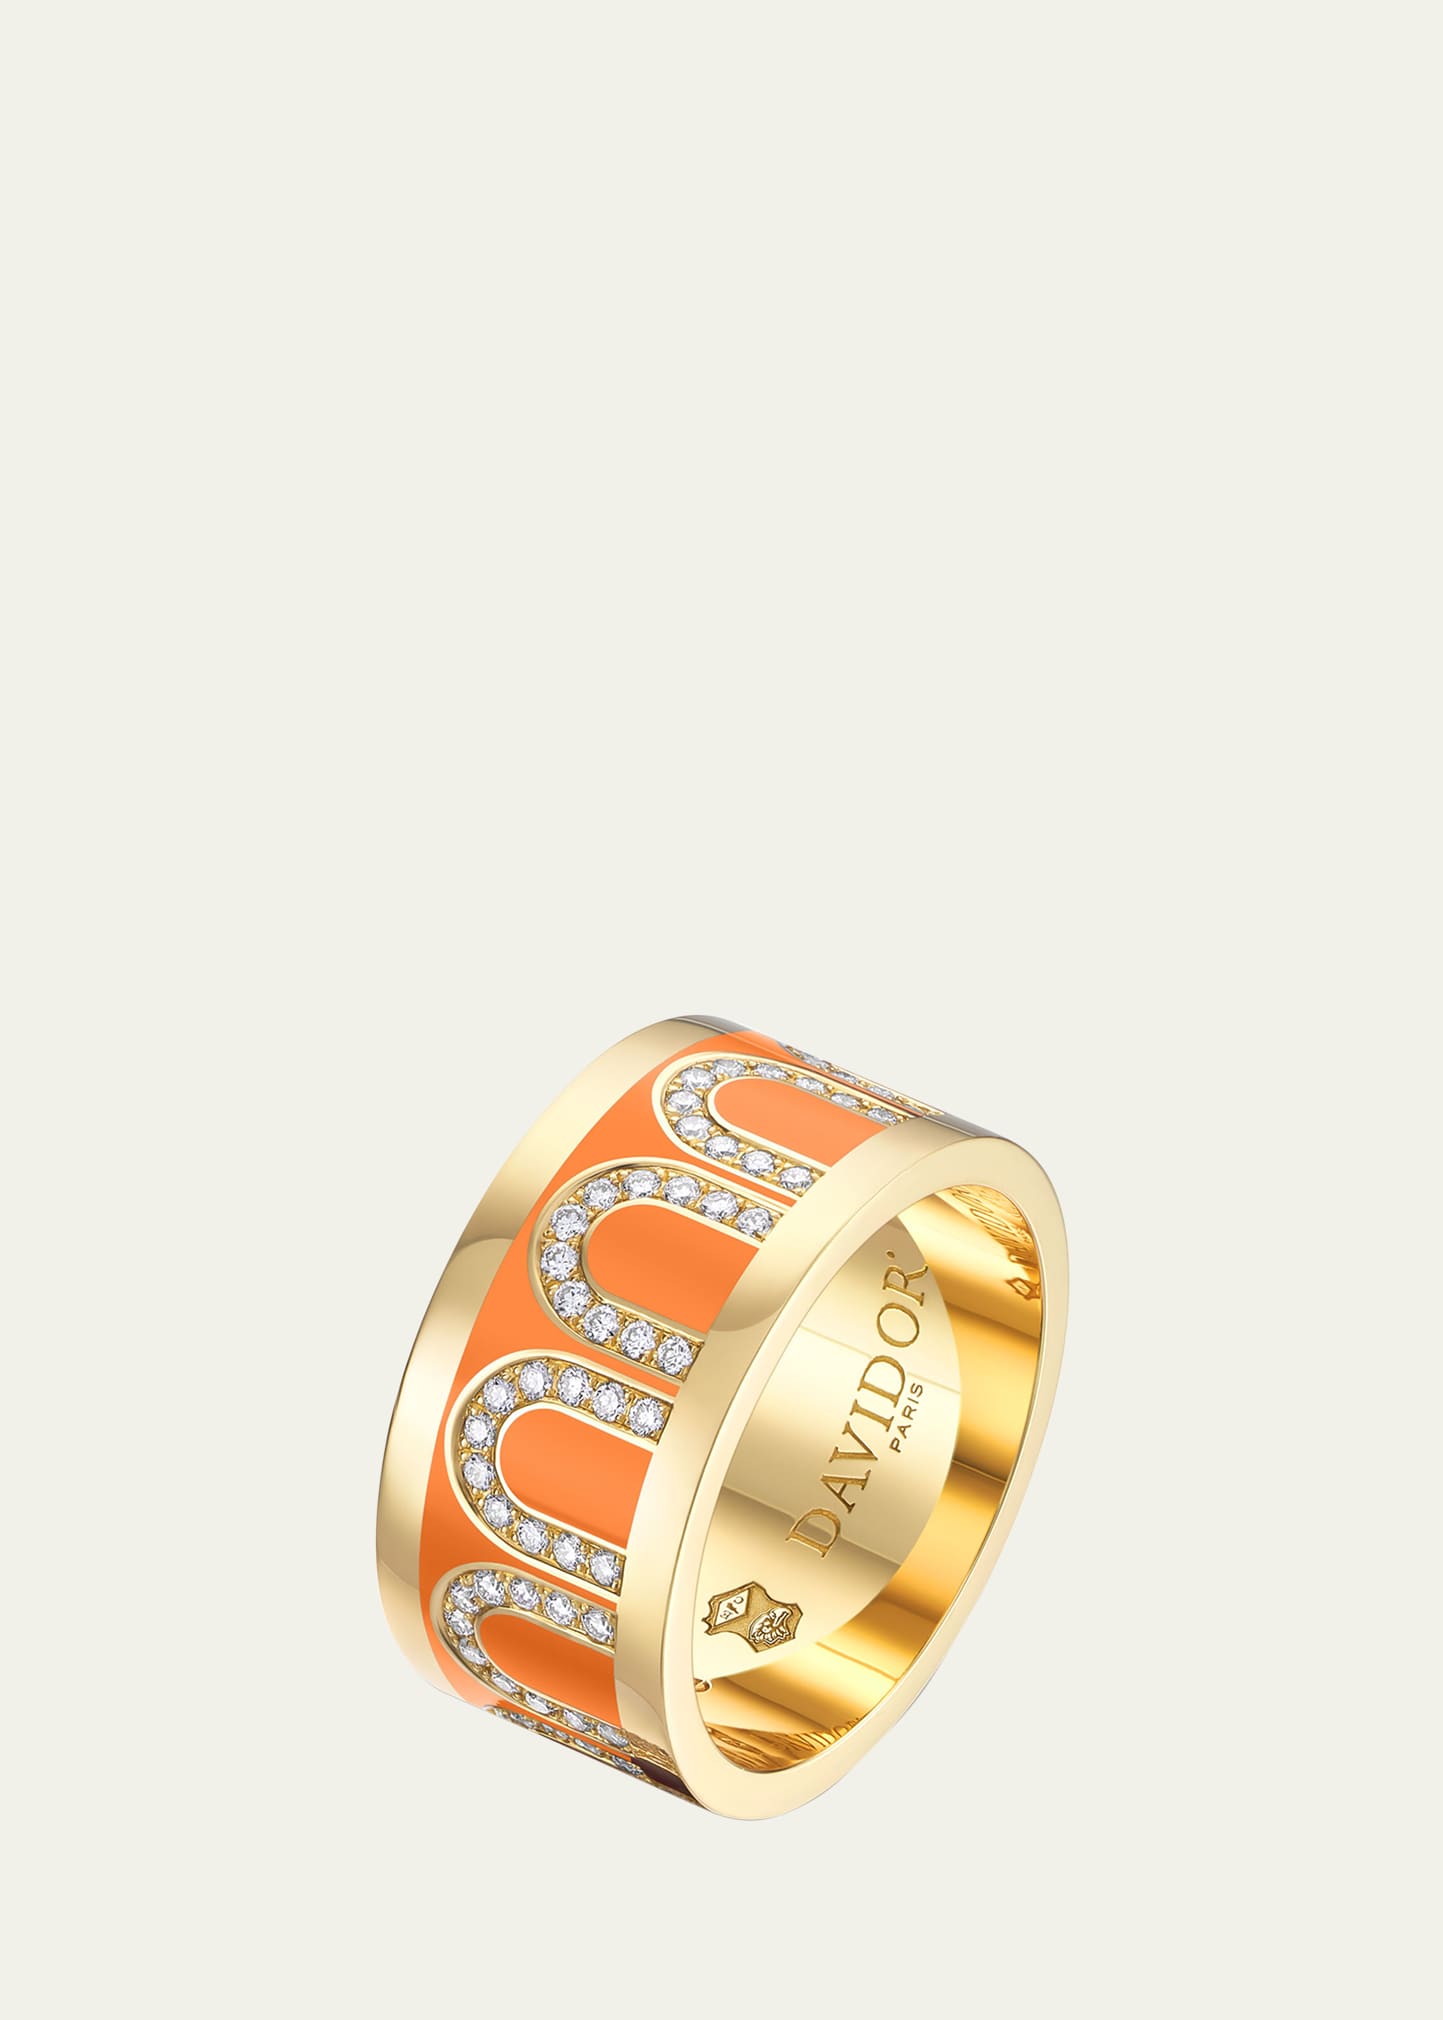 L'Arc de DAVIDOR Ring GM in 18K Yellow Gold with Zeste Lacquered Ceramic and Arcade Diamonds